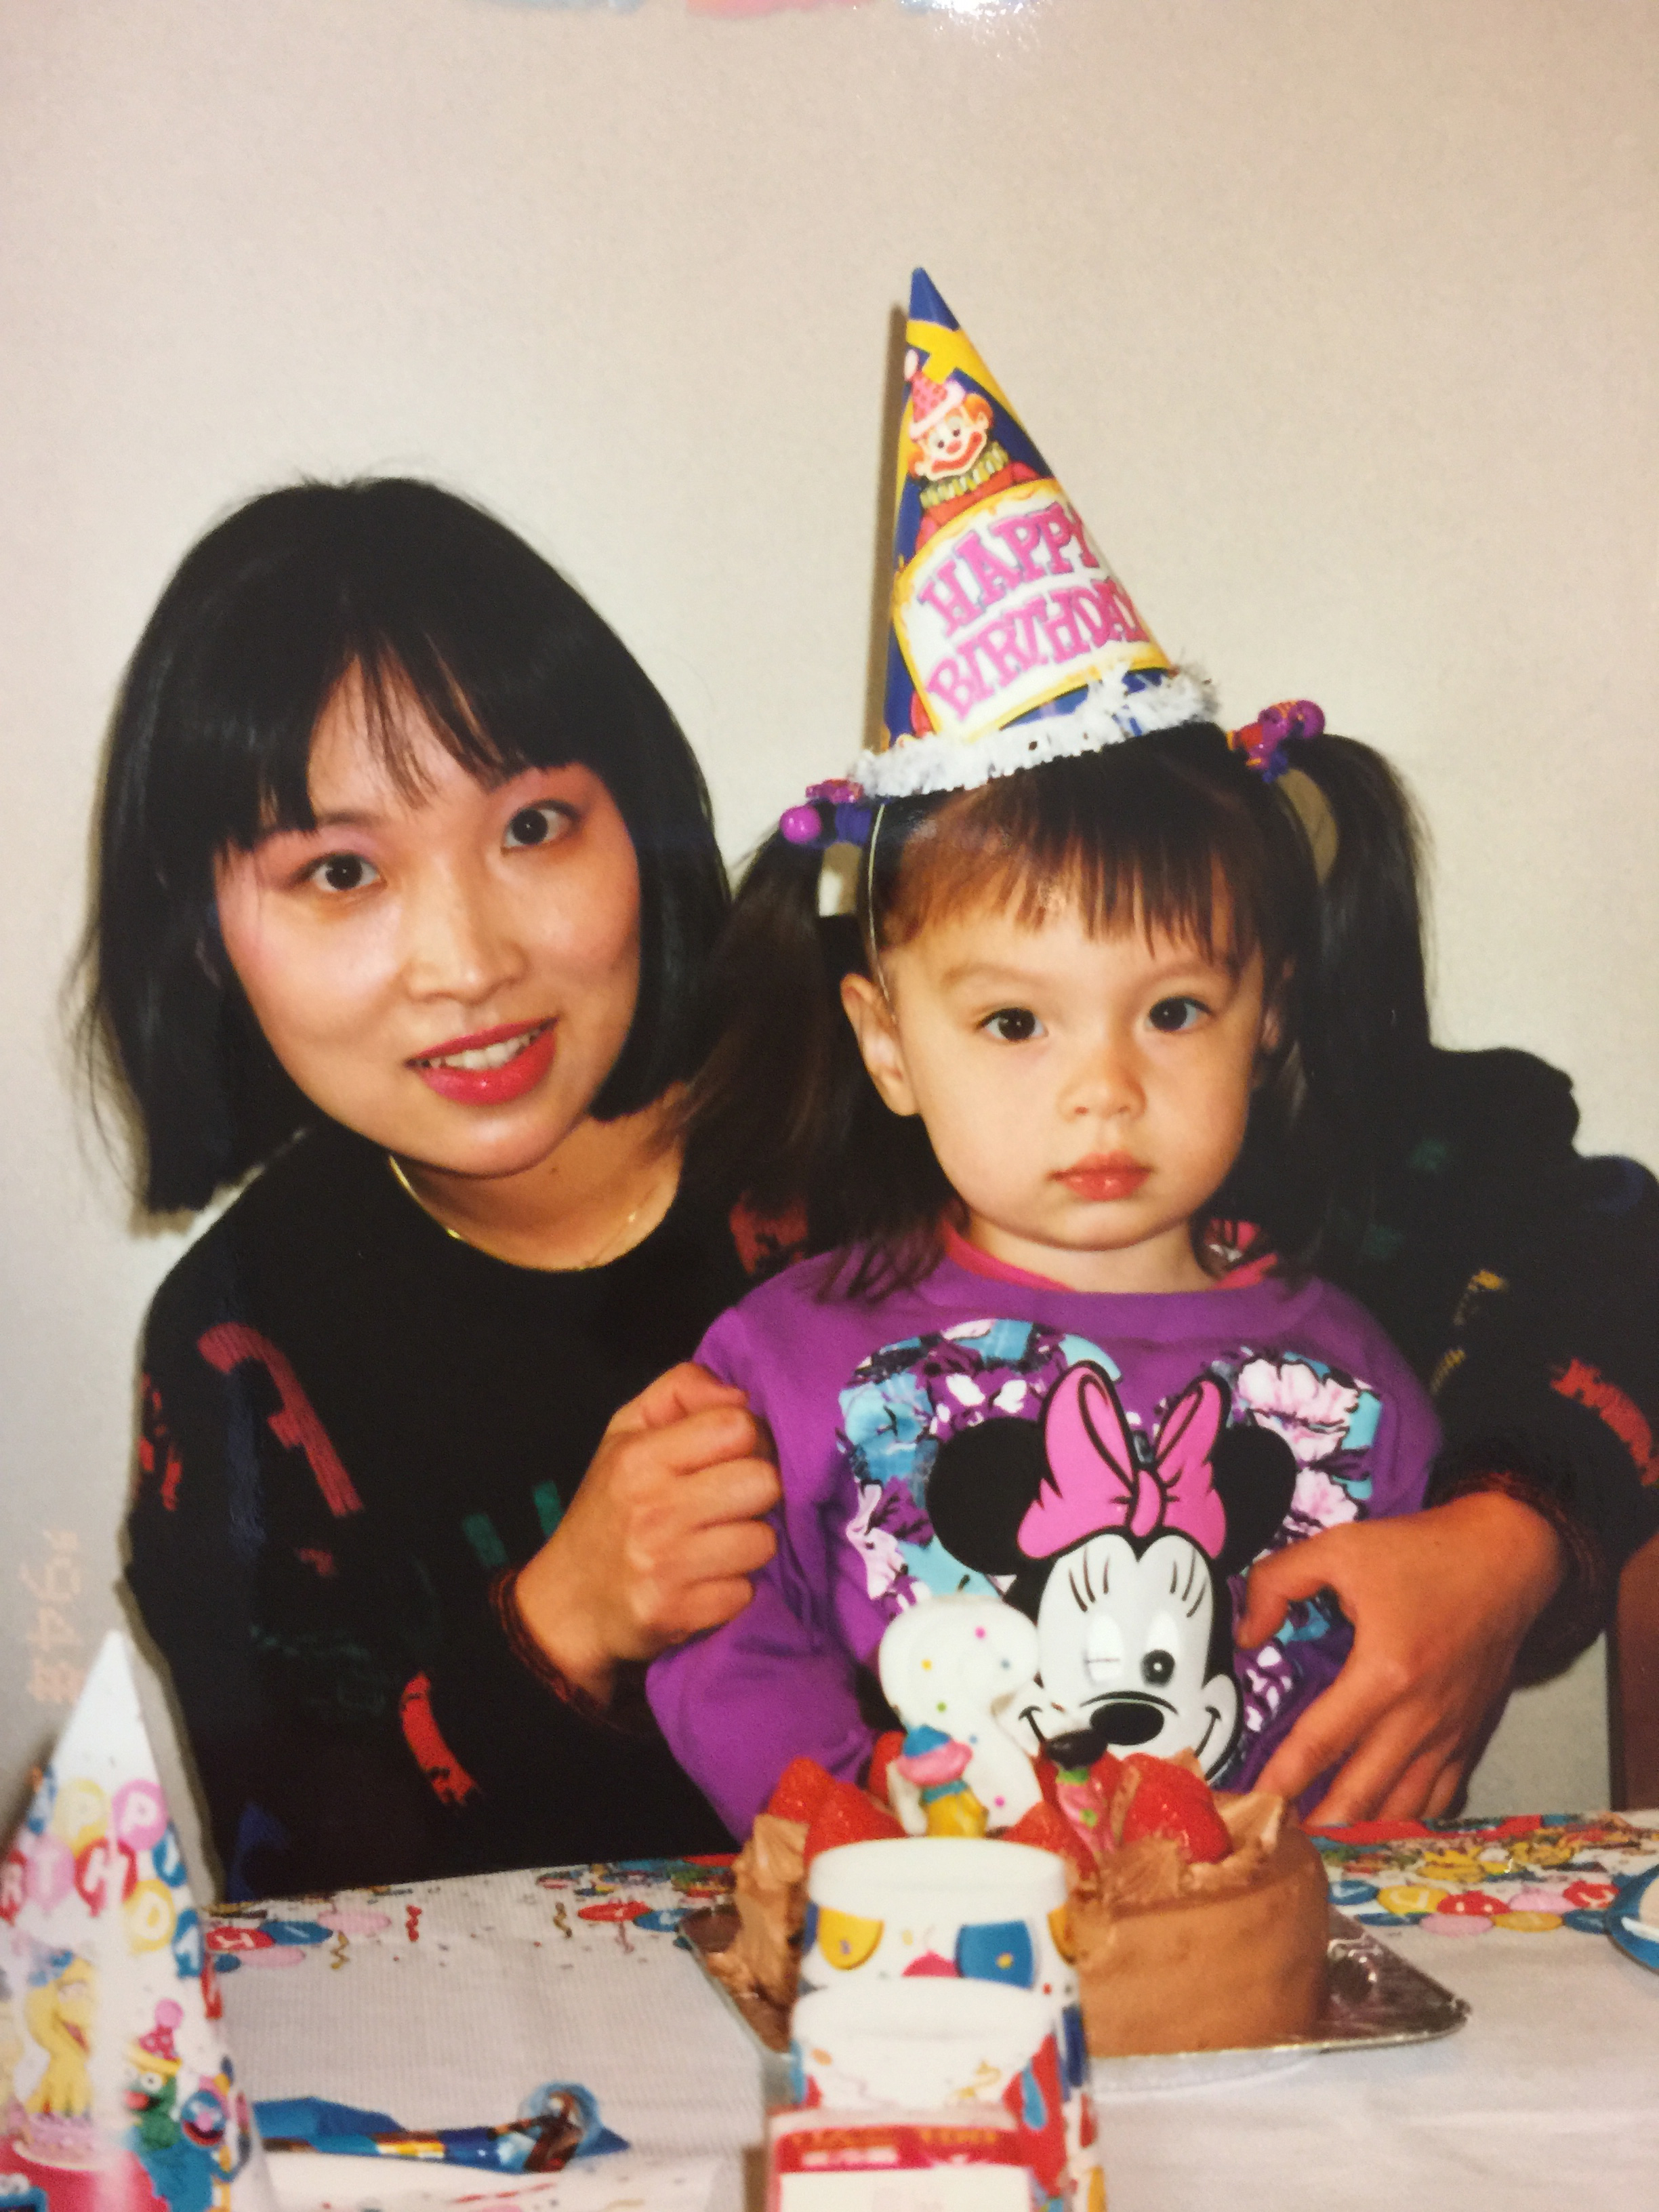 A Taiwanese woman with dark shoulder-length hair wears a jumper and holds a little girl in a birthday hat and Minnie Mouse top.